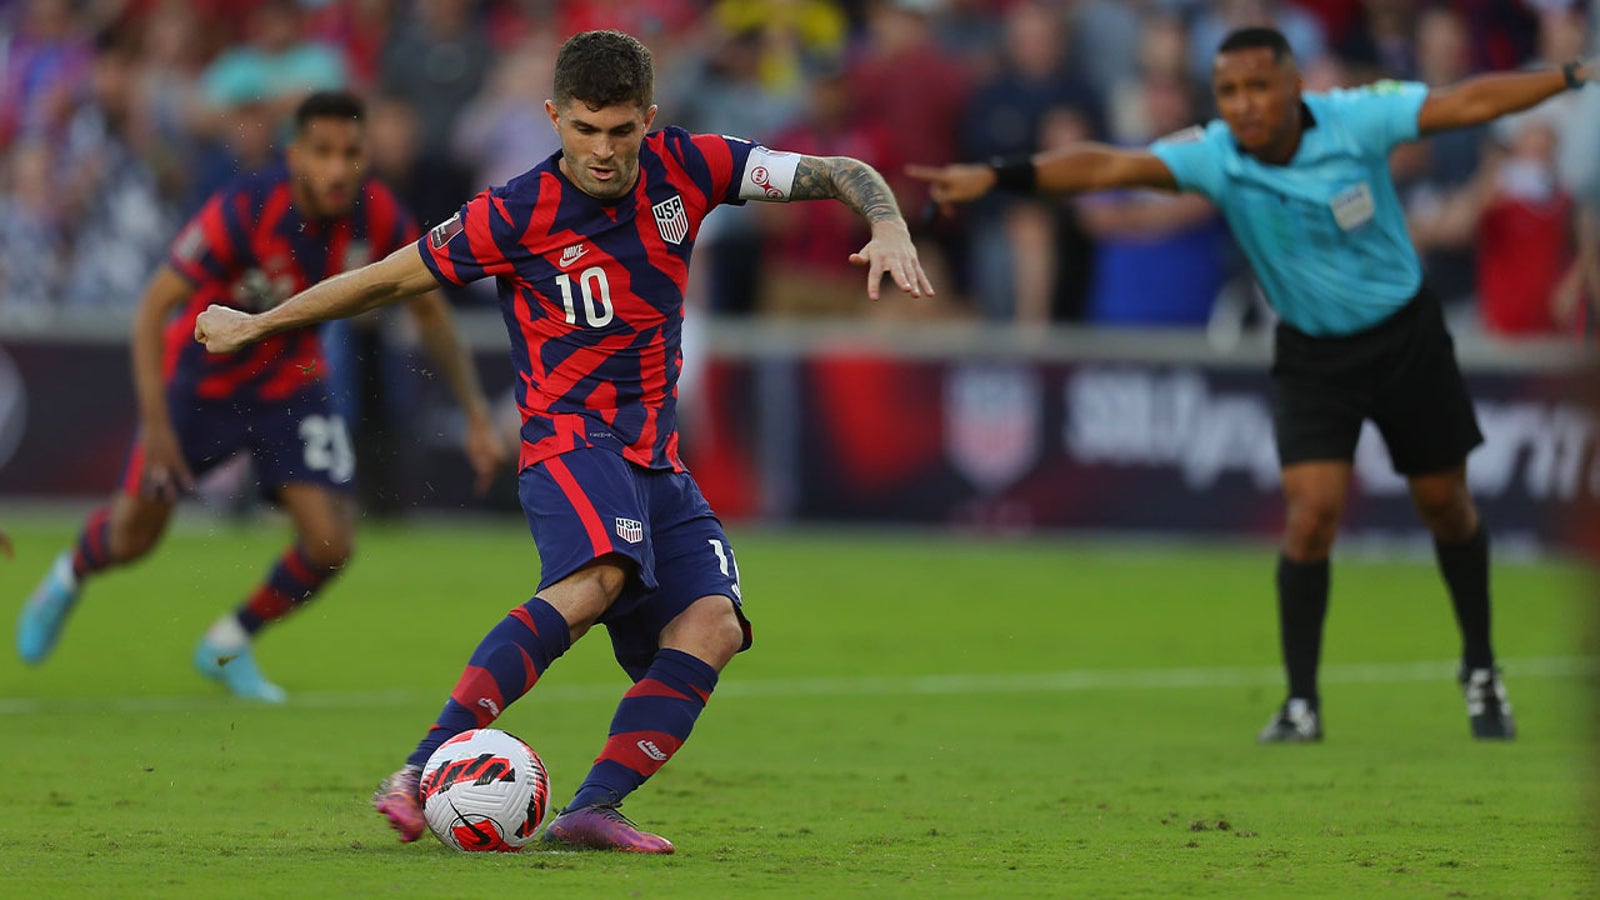 Christian Pulisic's early goals fuel USMNT's dominant first half